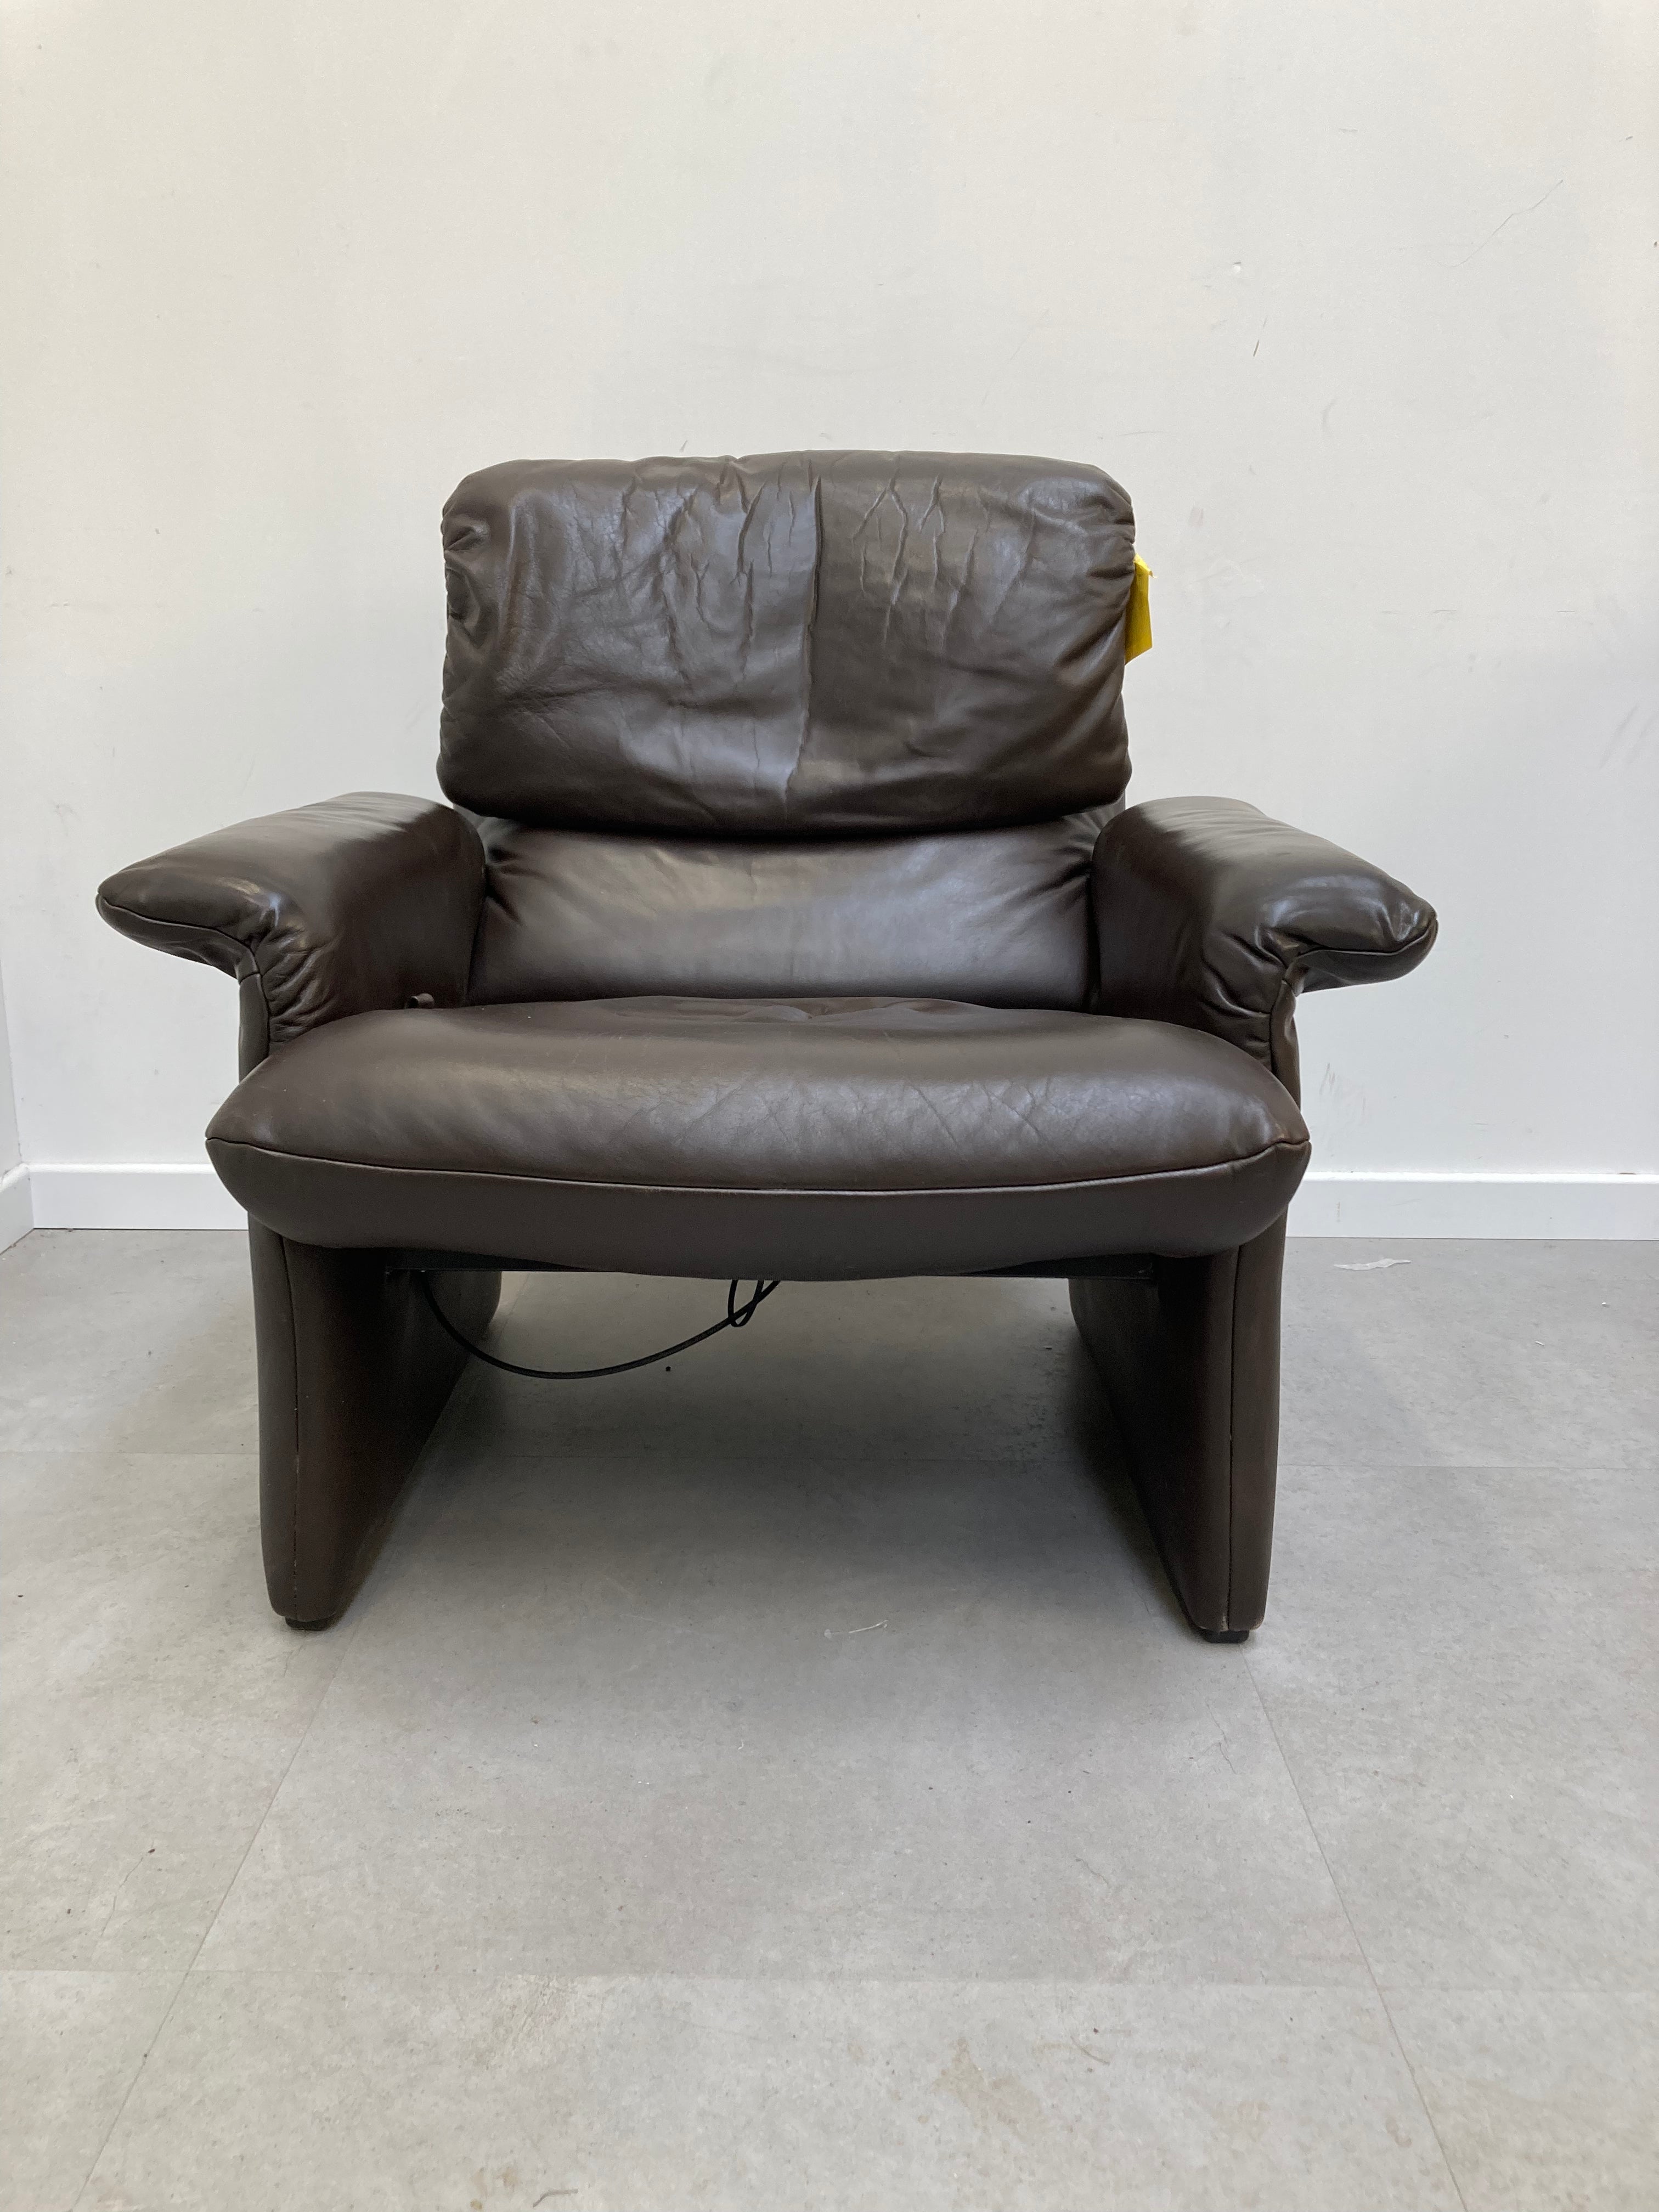 Vintage Relax Seat Cor Leather